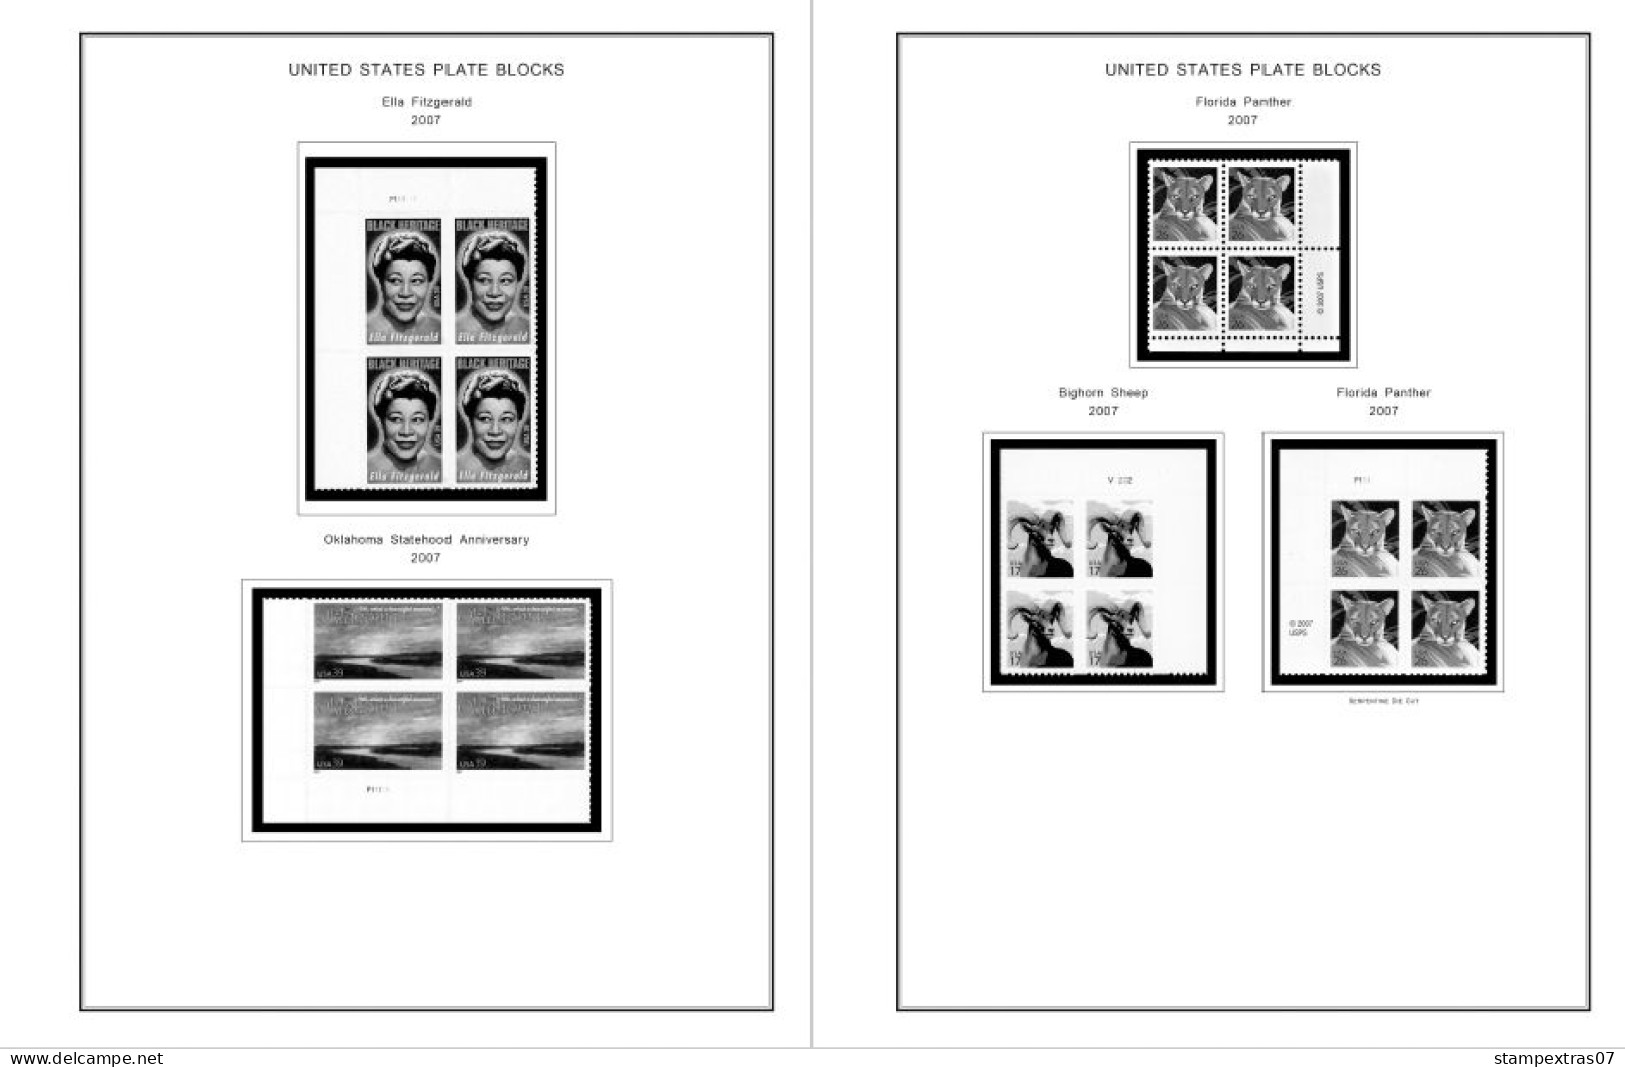 US 2006-2010 PLATE BLOCKS STAMP ALBUM PAGES (51 b&w illustrated pages)